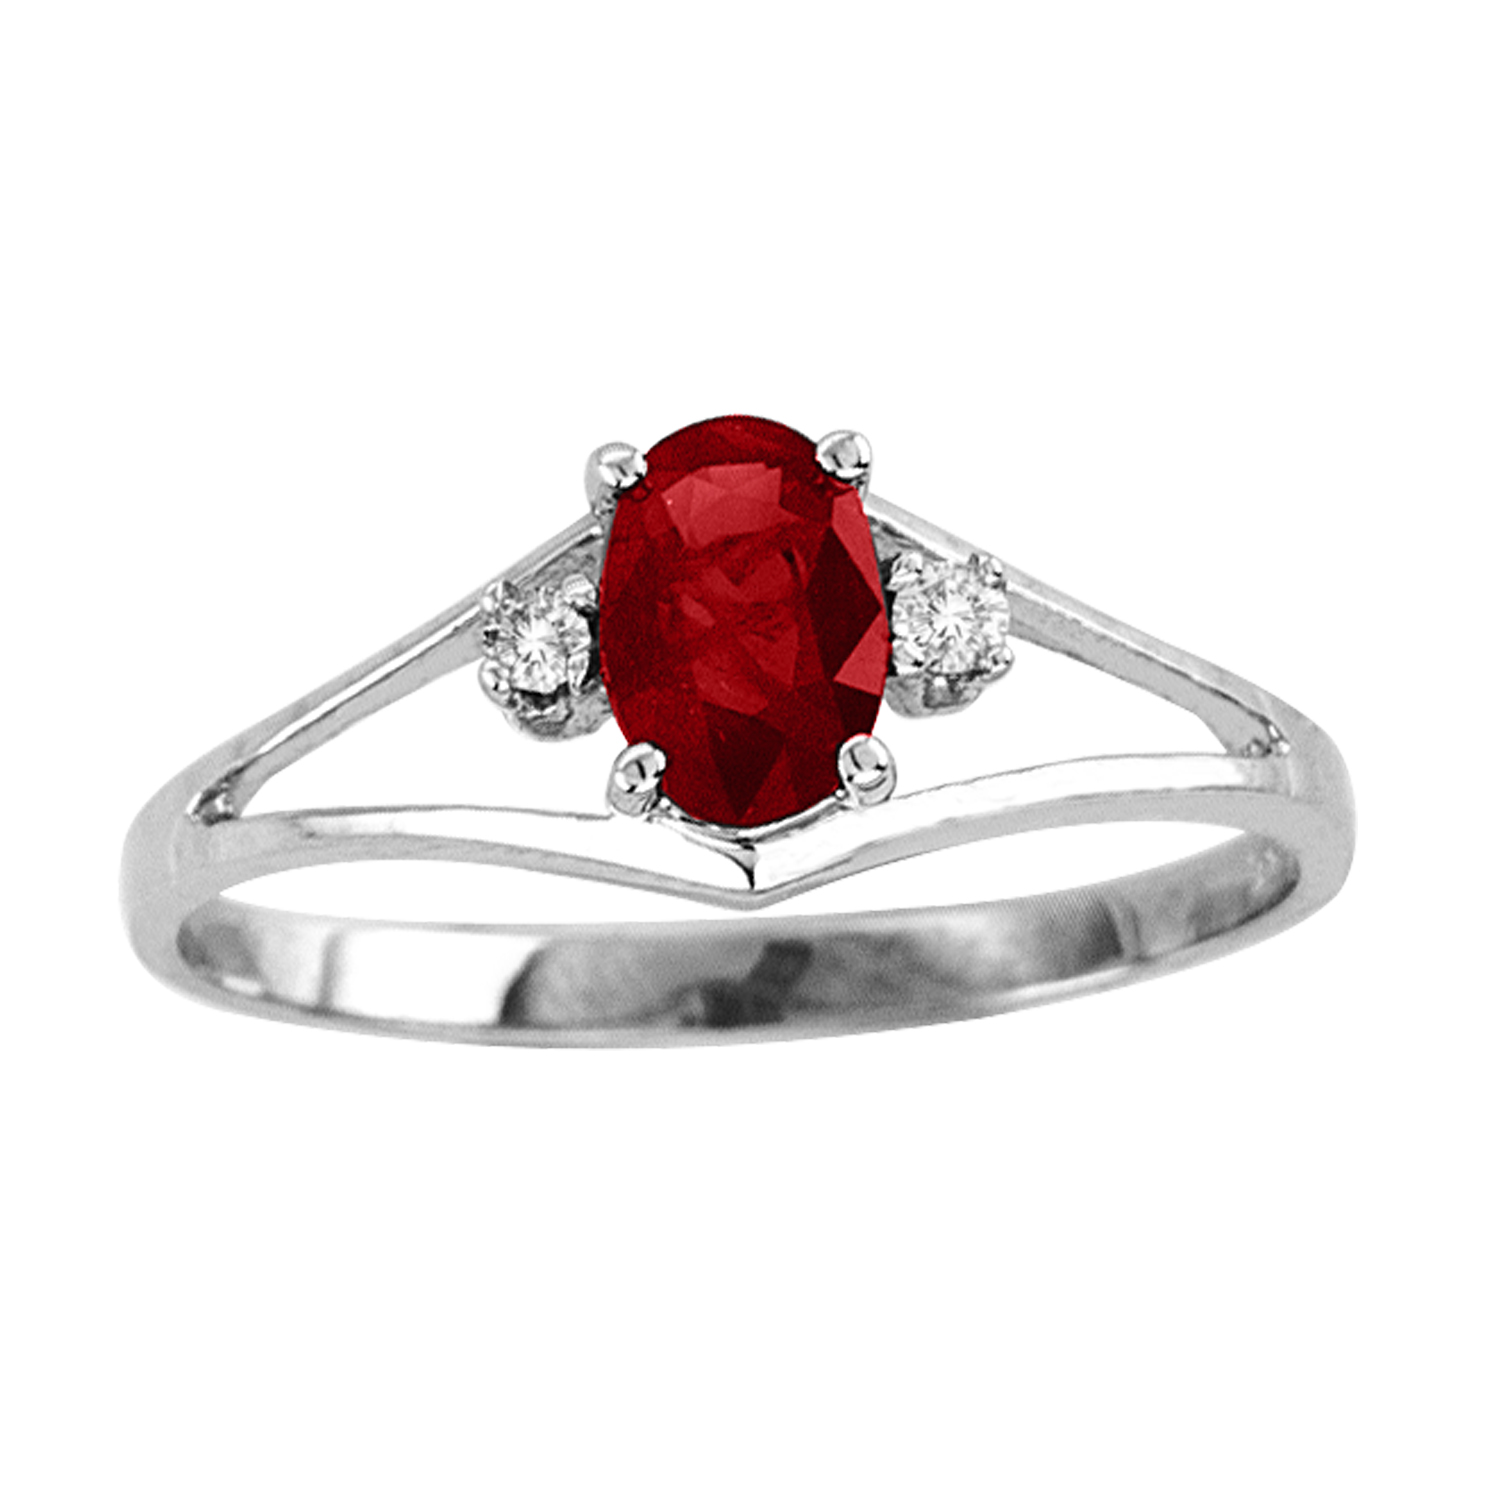 View Natural Heated Oval Ruby and Diamond Ring set in 14k Gold